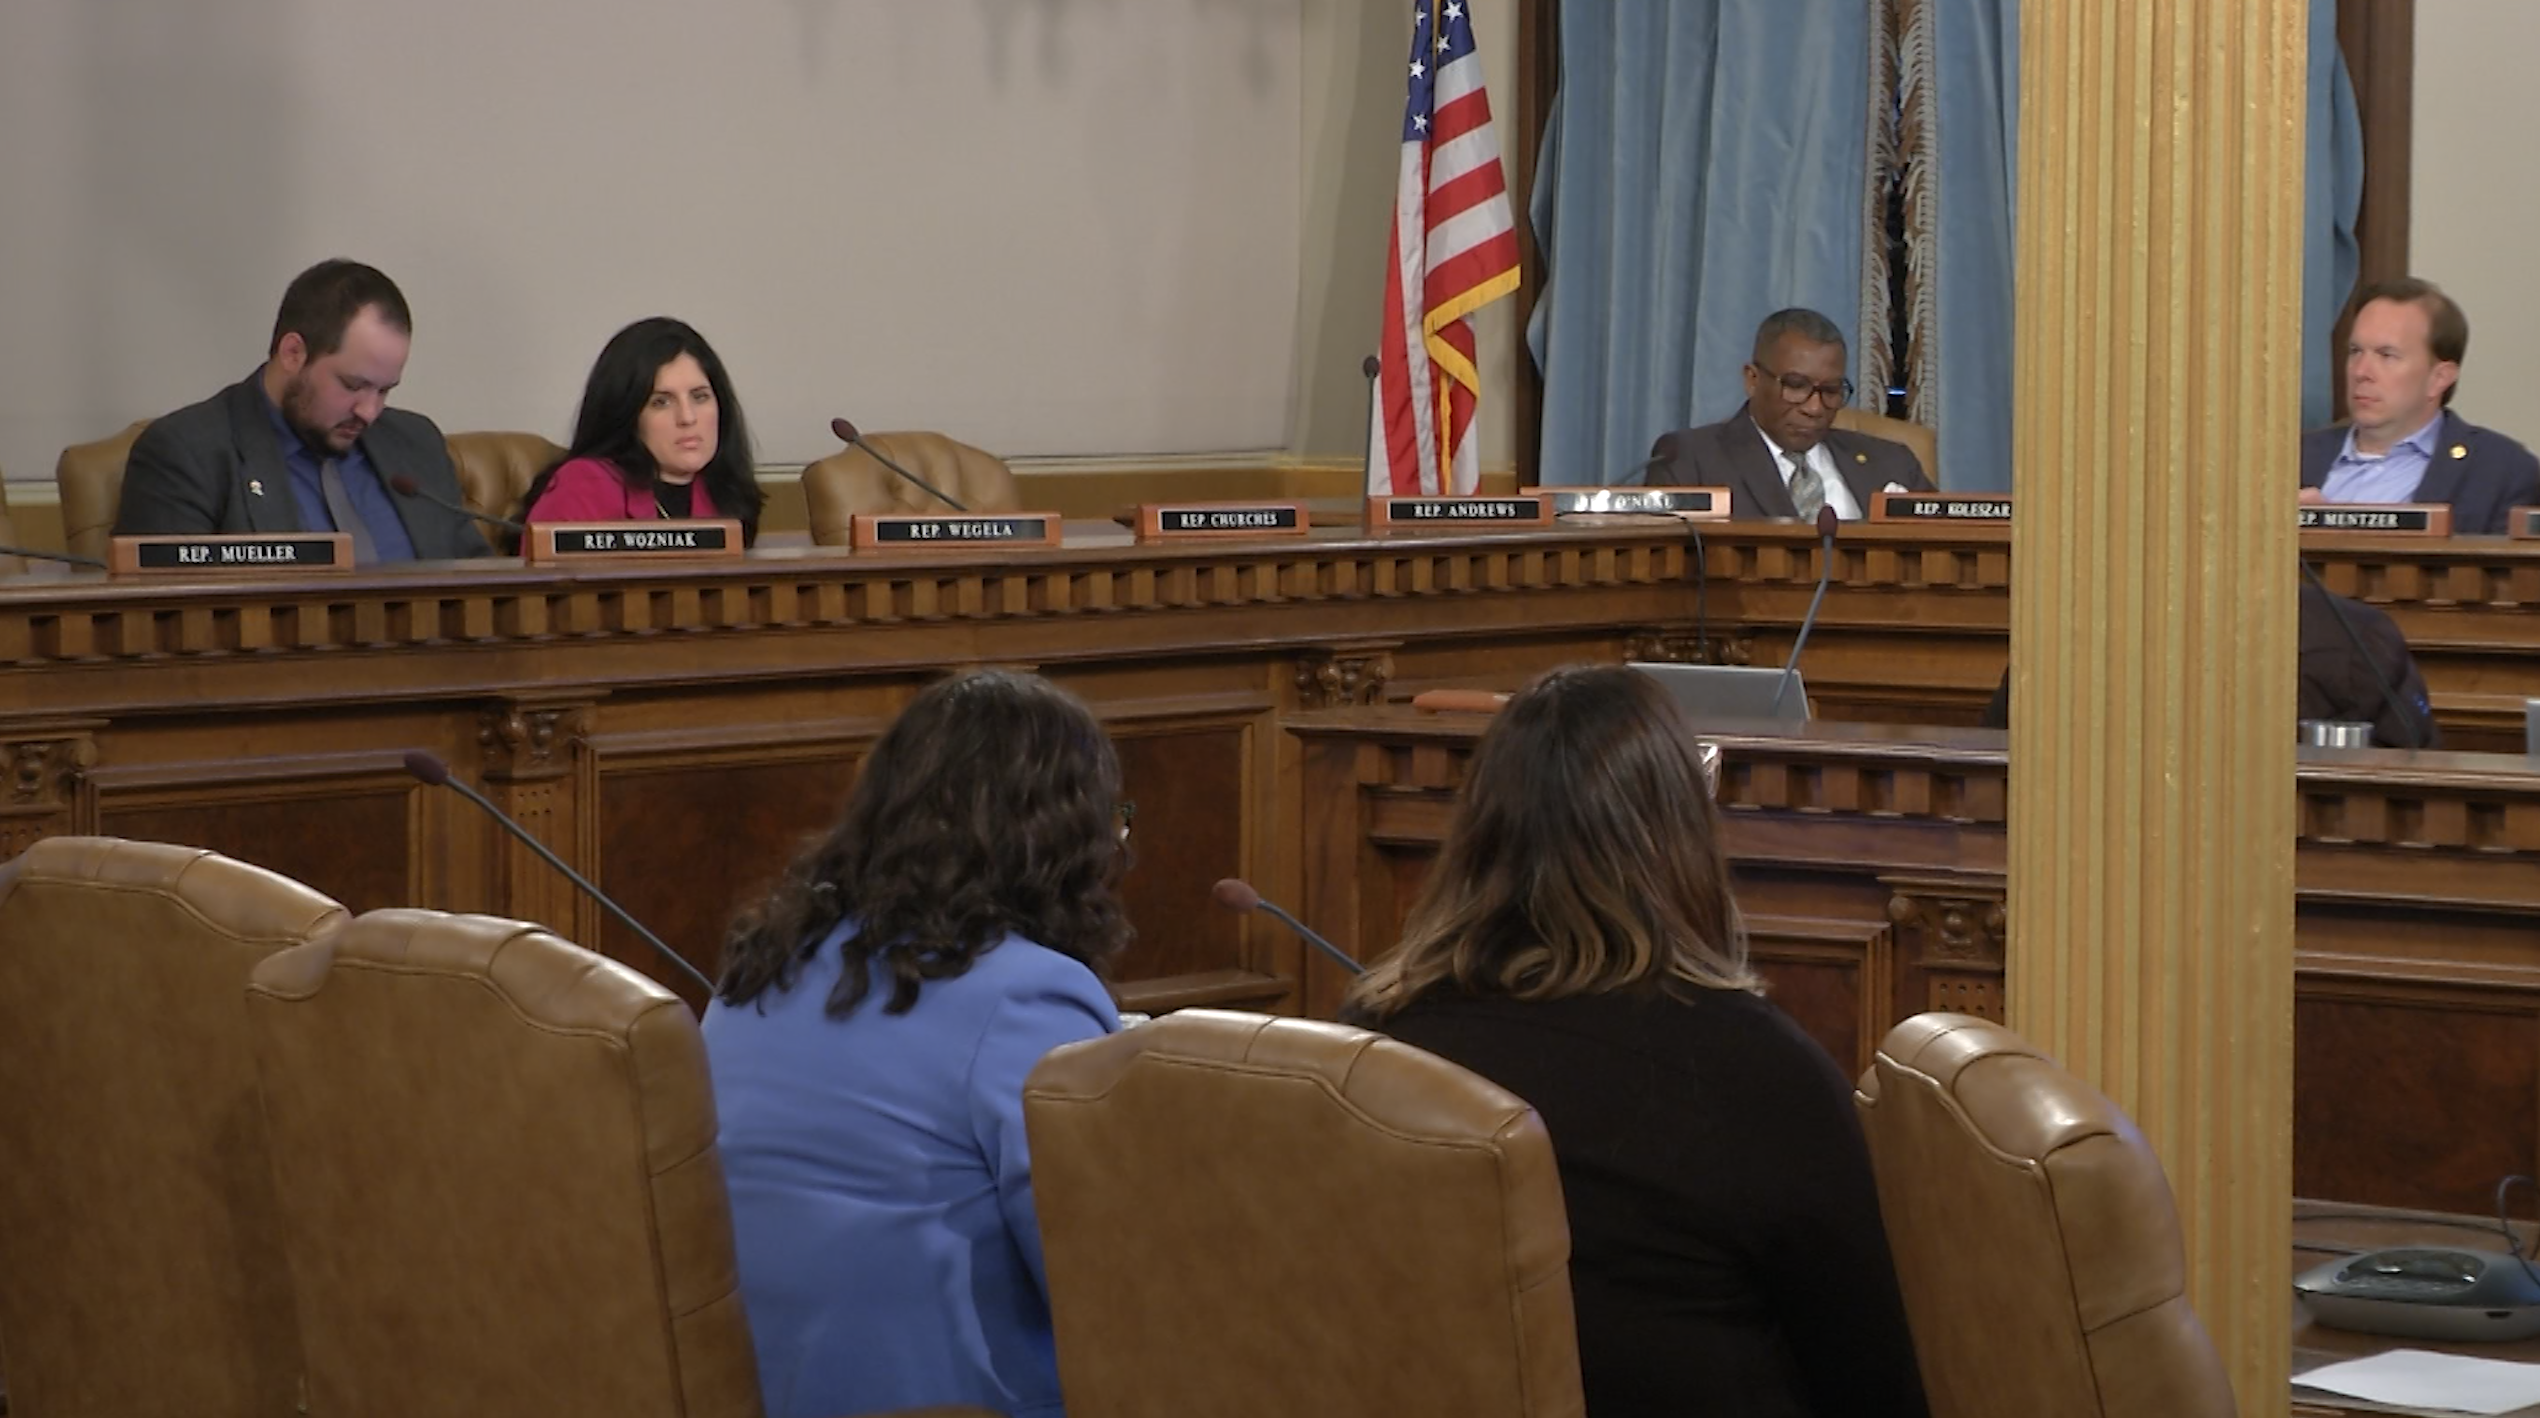 Unemployment agency director testifies in House committee after audit